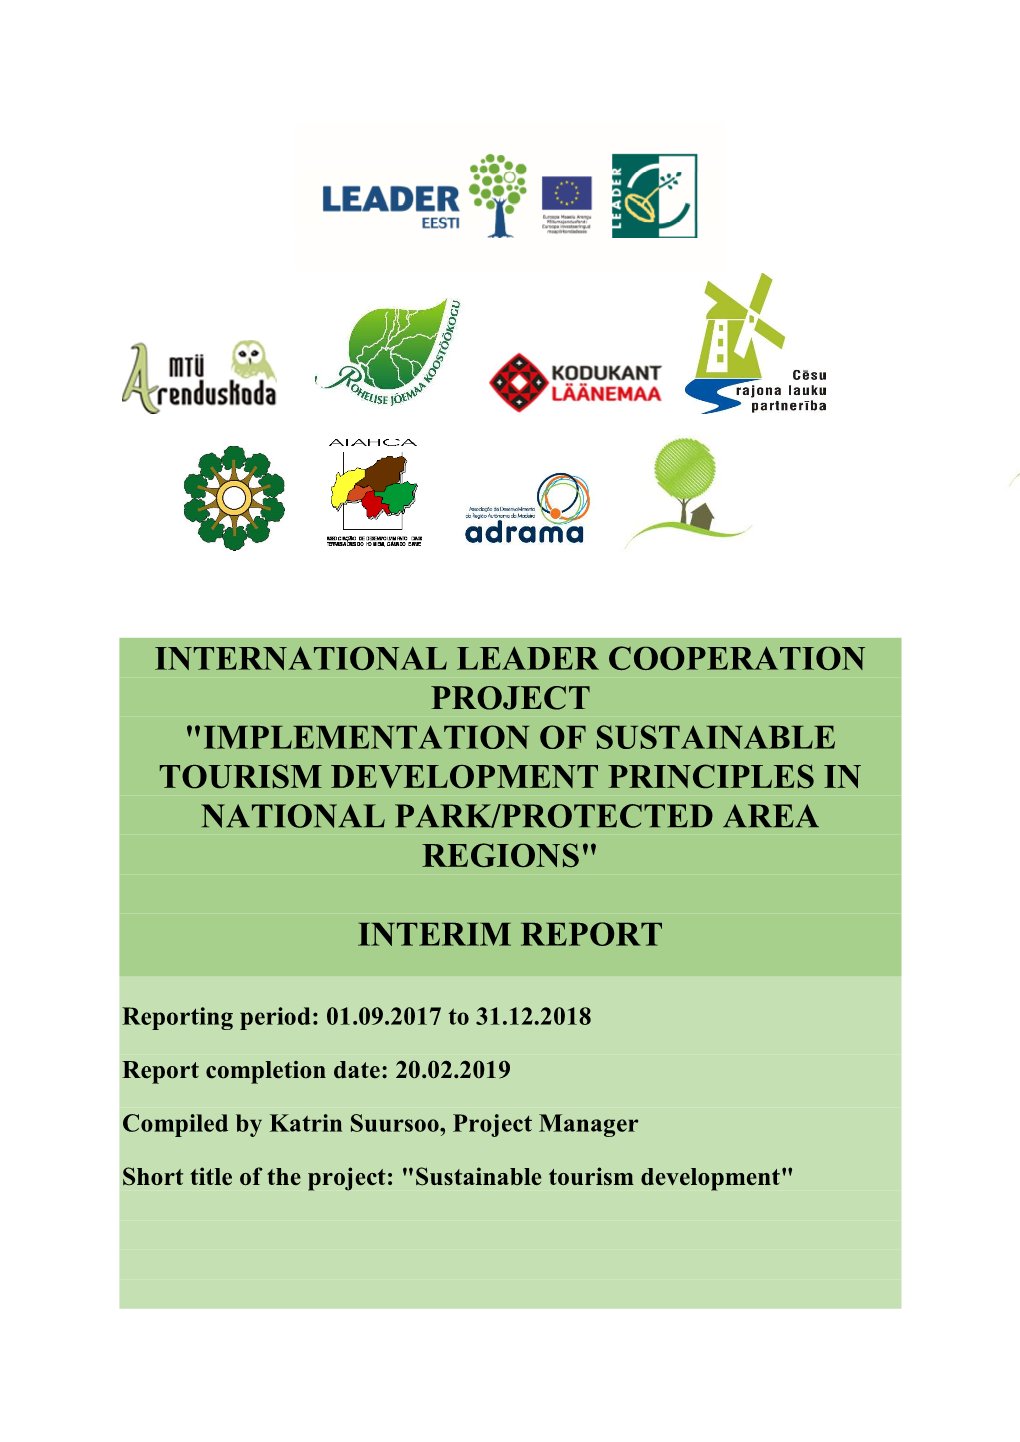 Implementation of Sustainable Tourism Development Principles in National Park/Protected Area Regions"